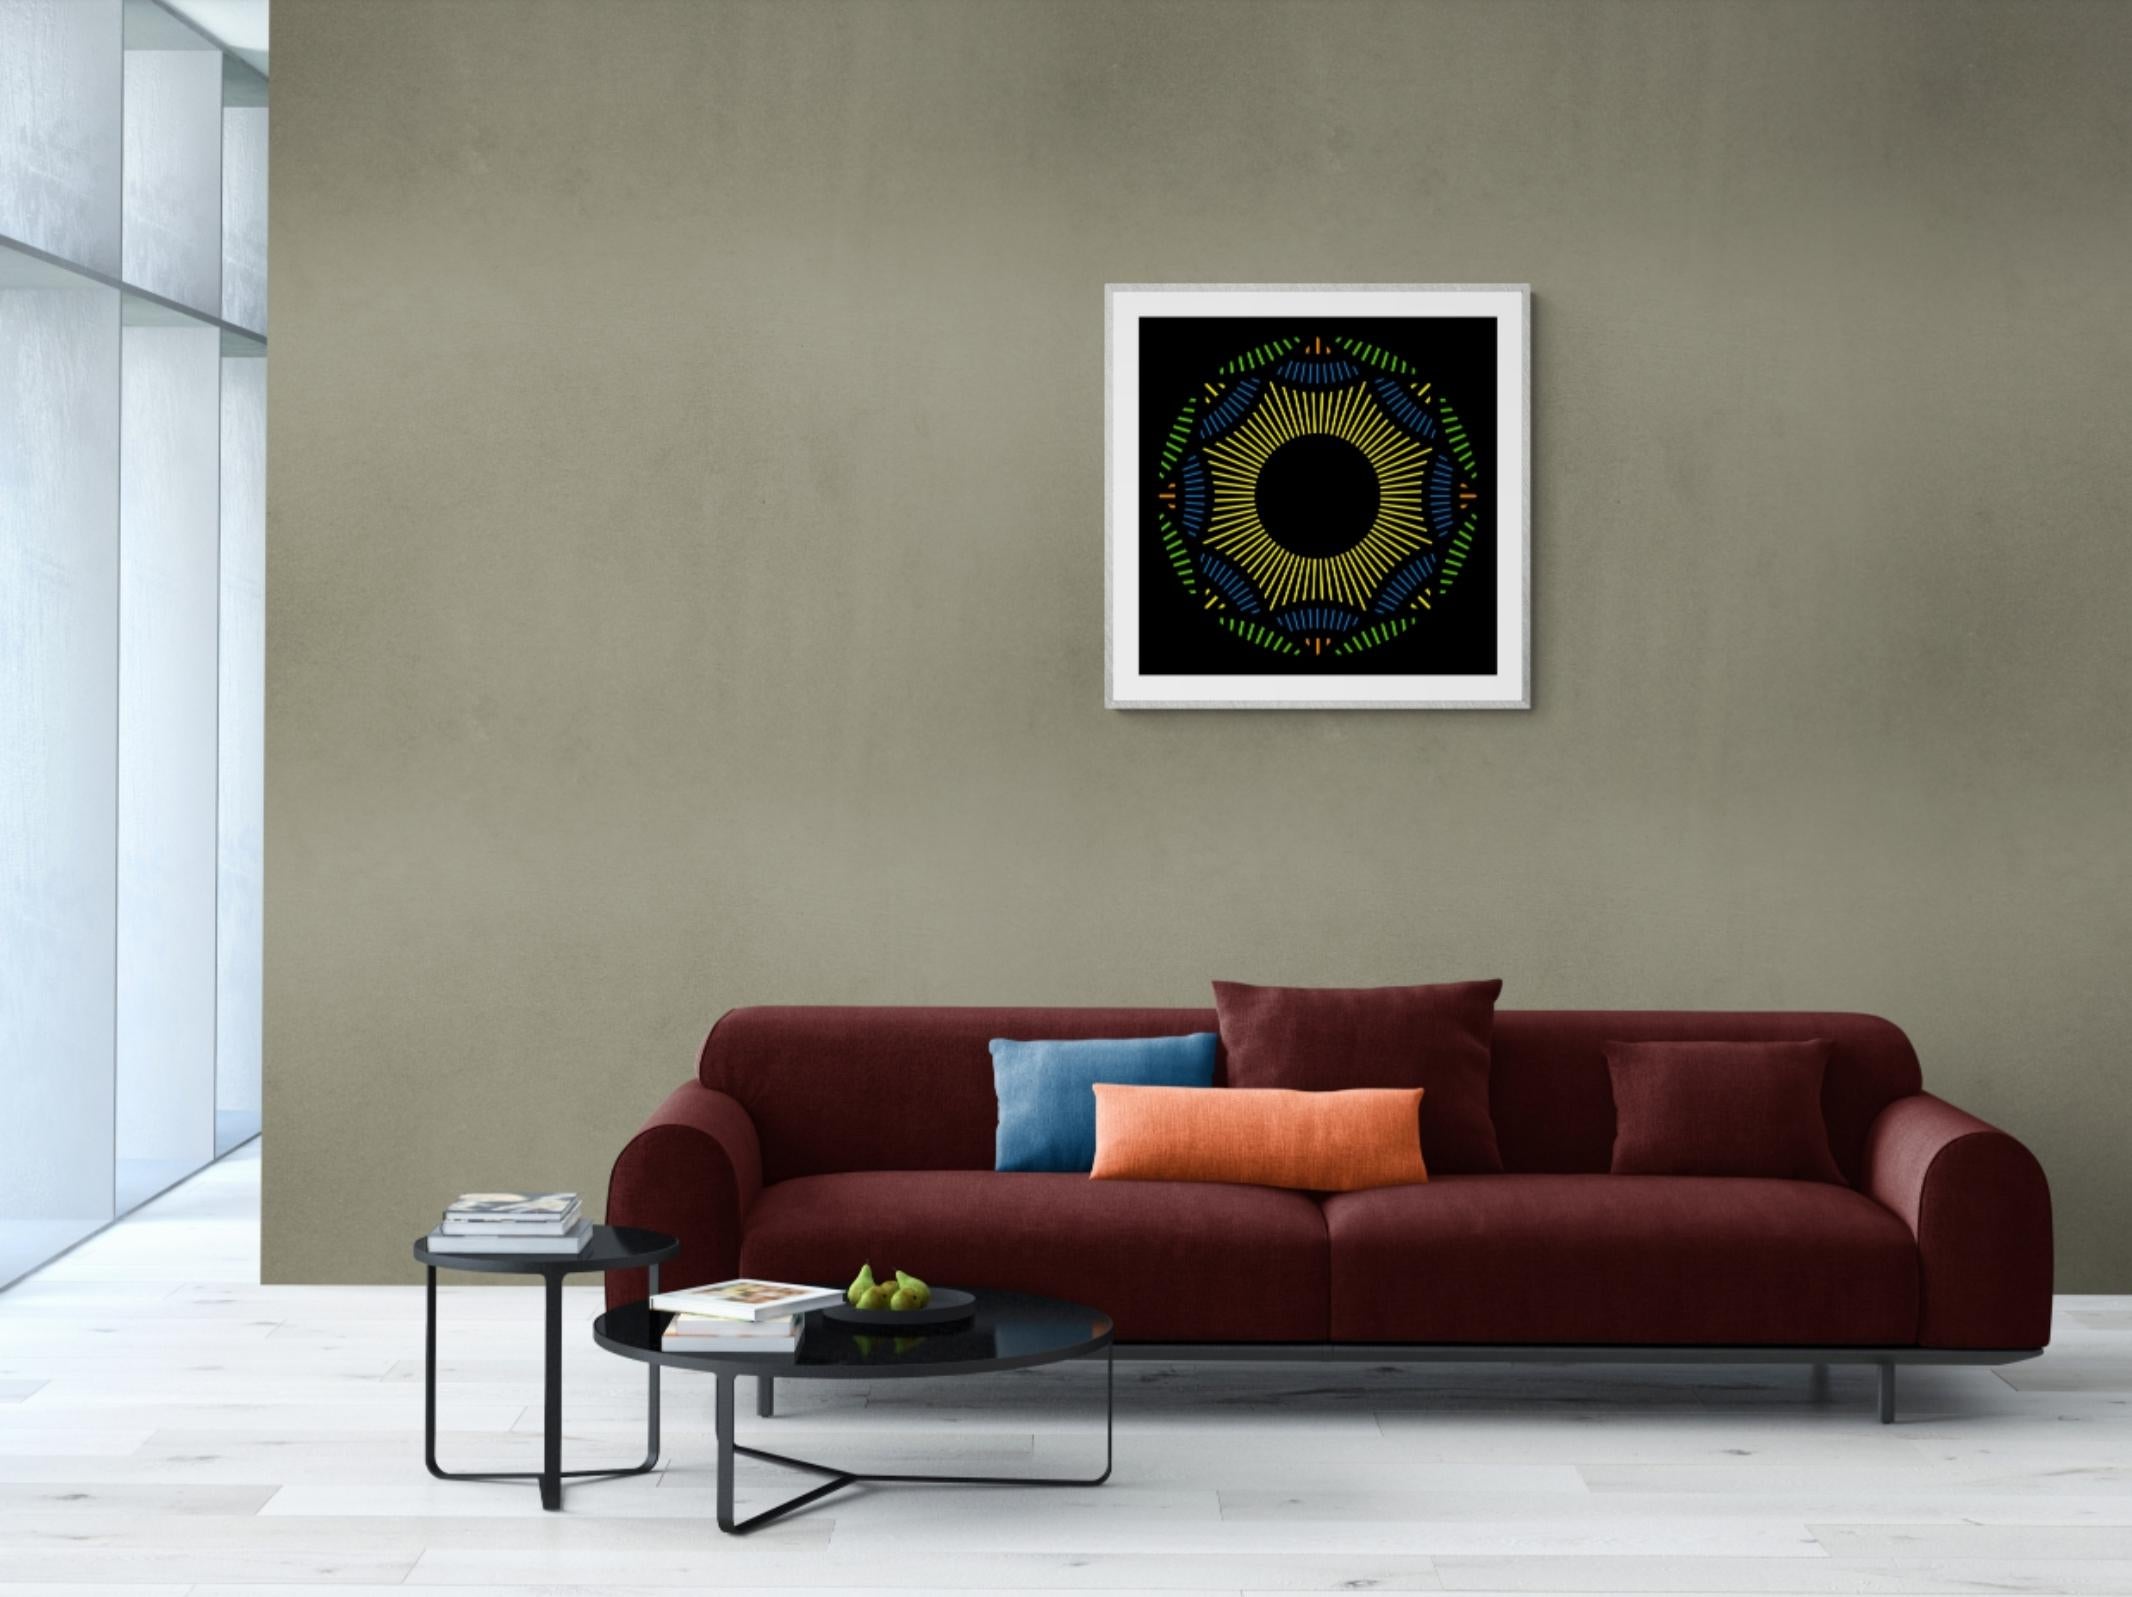 Nebulosa 14 - Black Abstract Print by Julio Campos